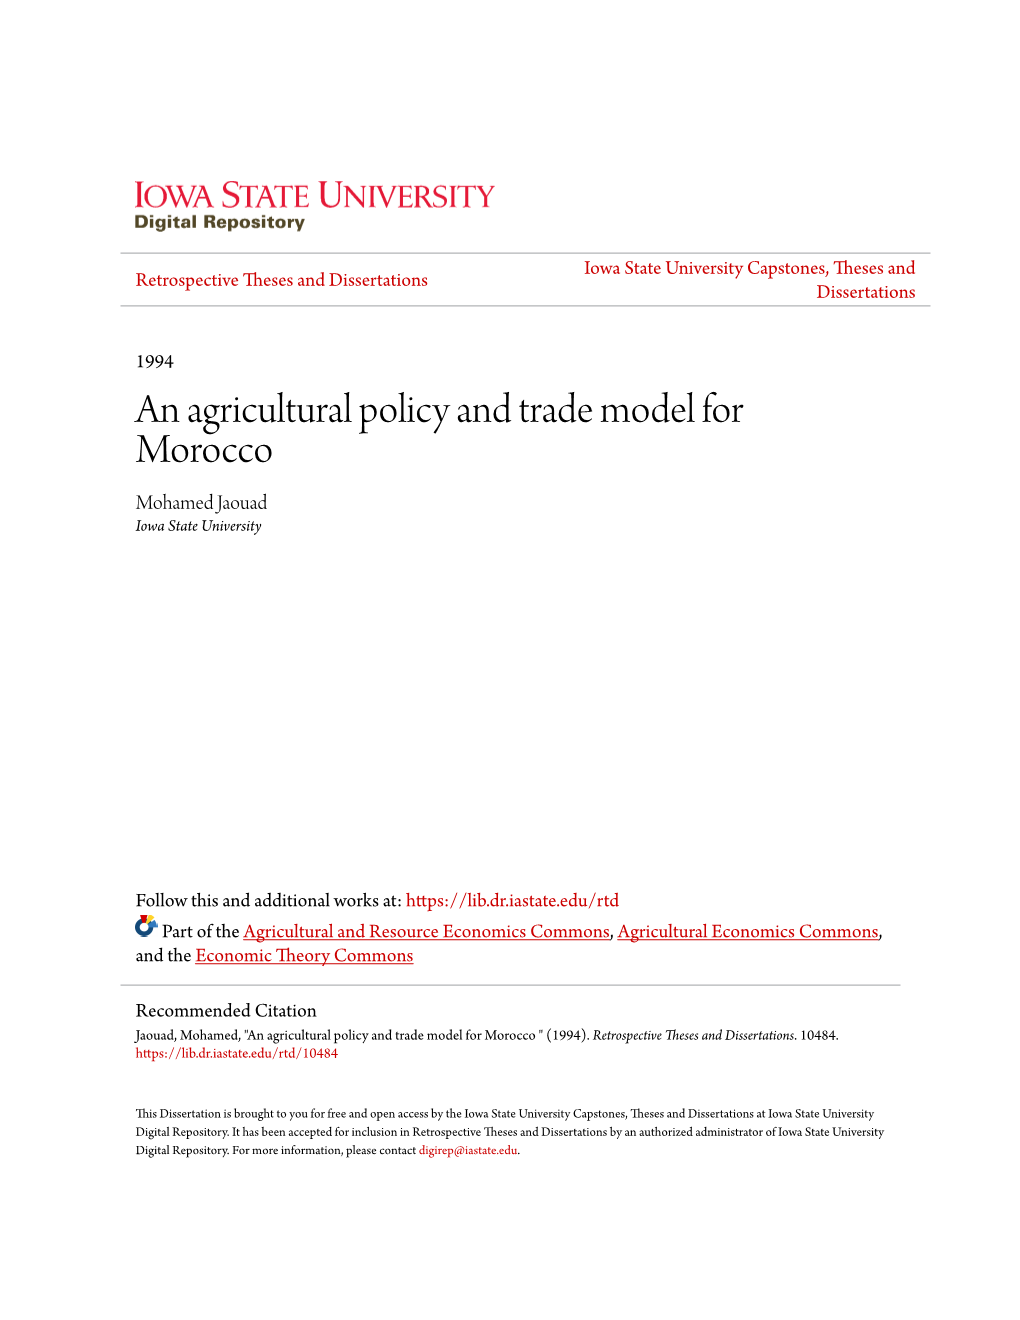 An Agricultural Policy and Trade Model for Morocco Mohamed Jaouad Iowa State University